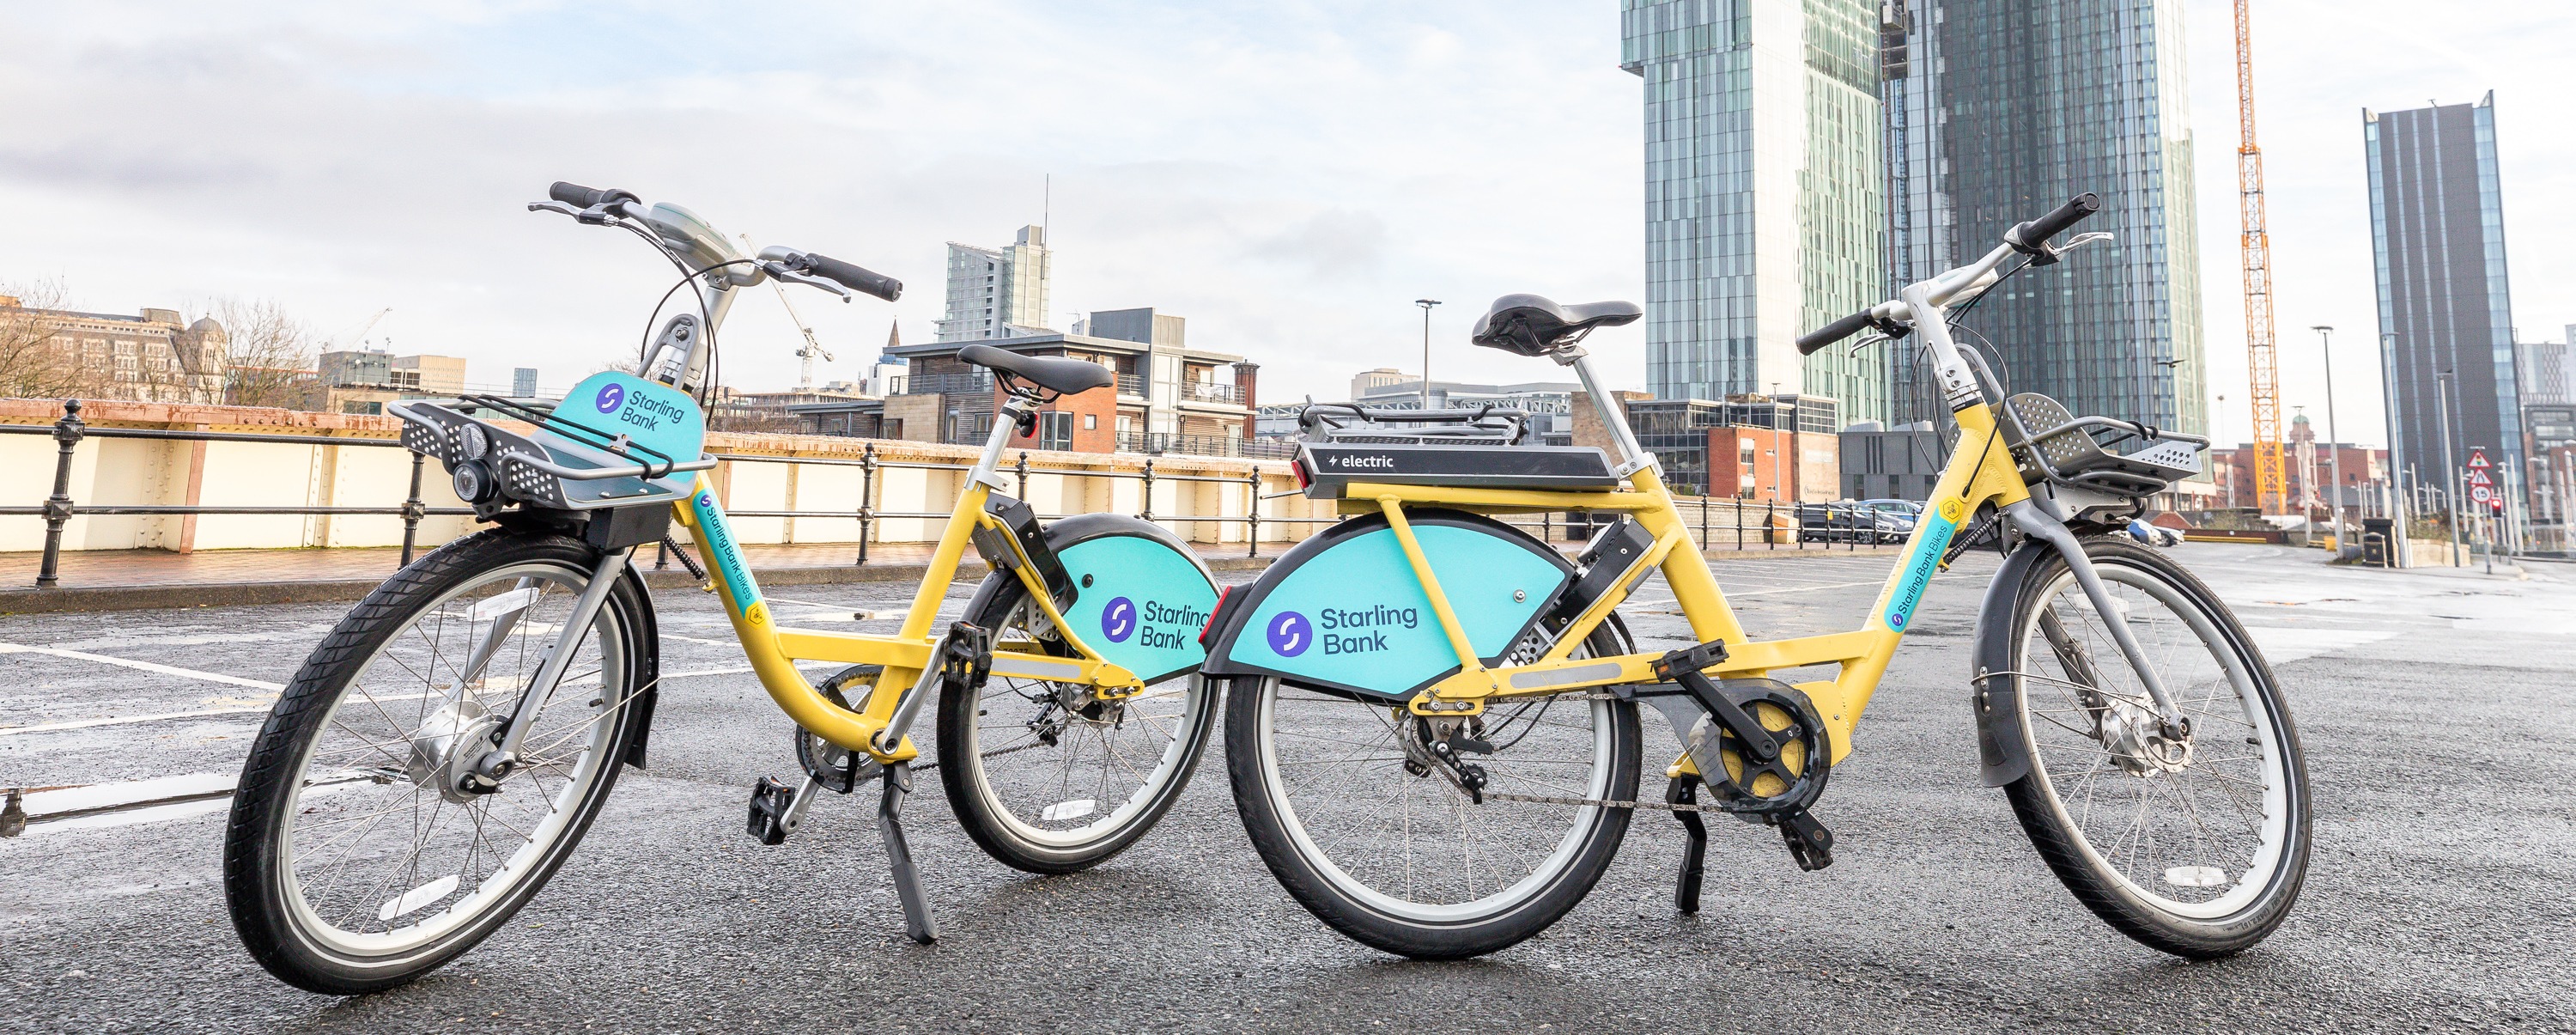 Two starling bank bikes in manchester city centre